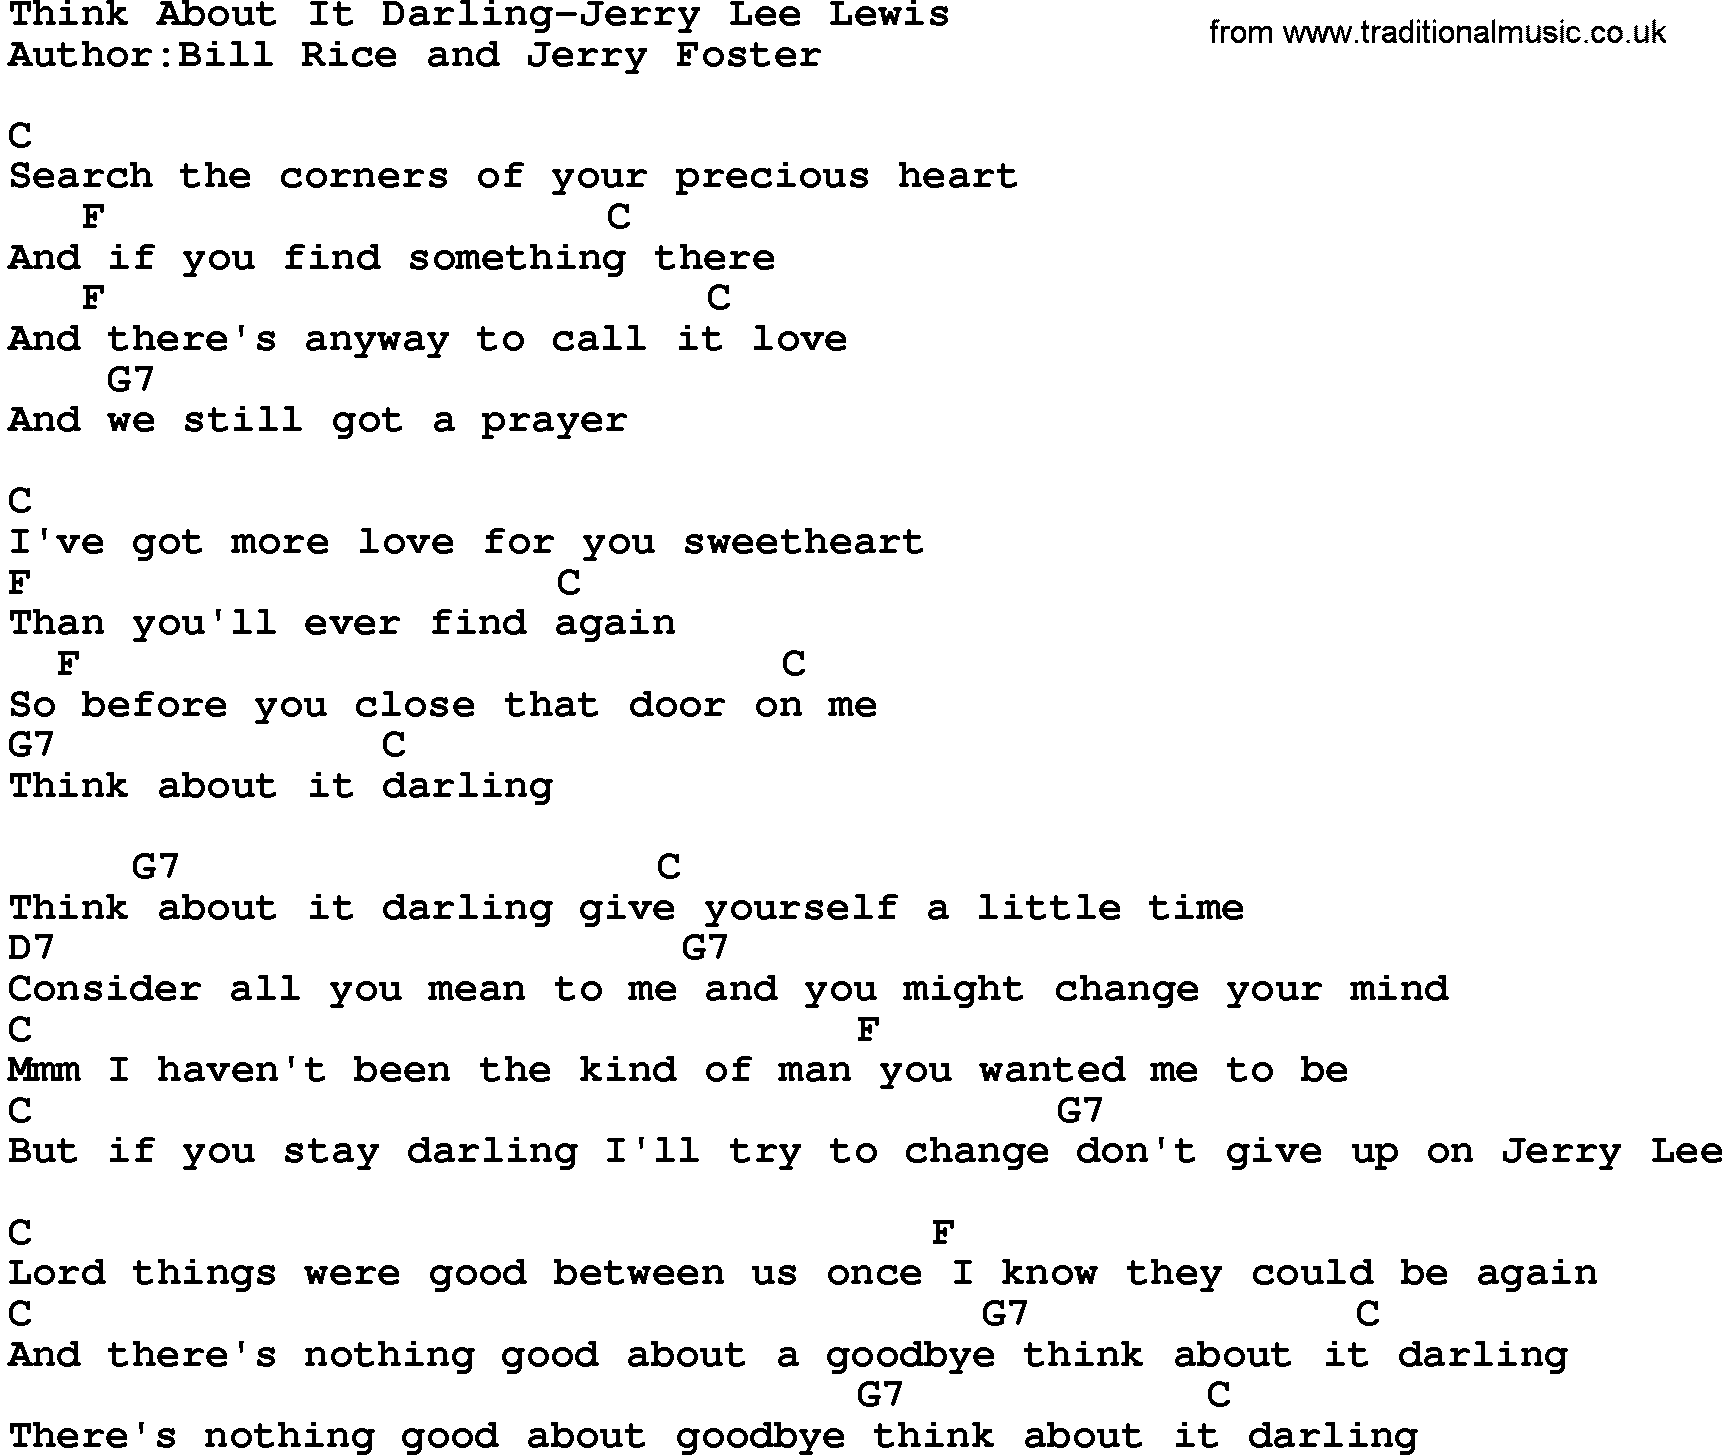 Country music song: Think About It Darling-Jerry Lee Lewis lyrics and chords